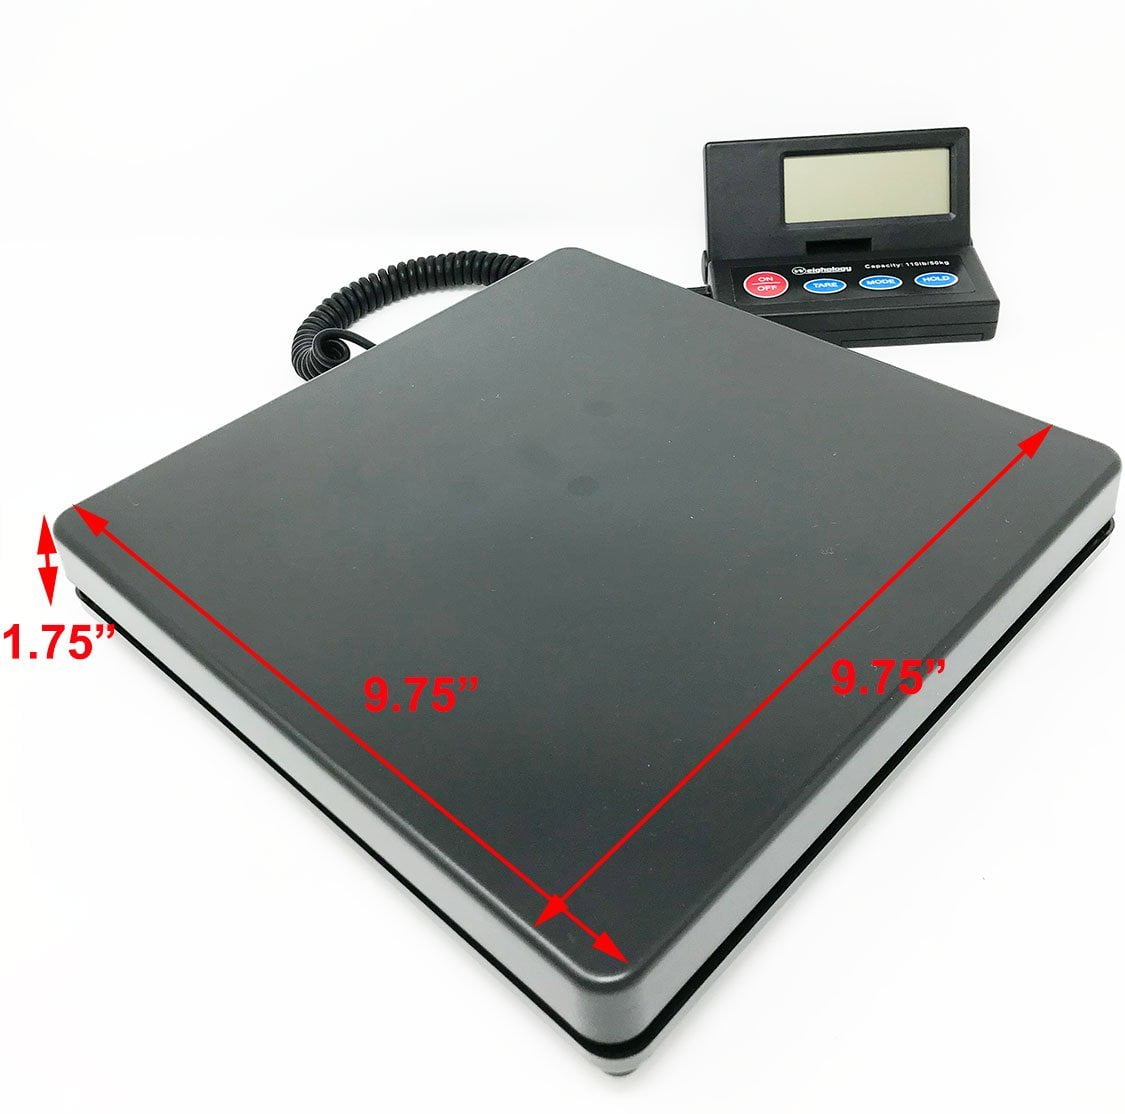 Weighology Heavy Duty Digital Postal Parcel Scale UPS USPS Post Office Scale 440 Lb Stainless Steel Platform 